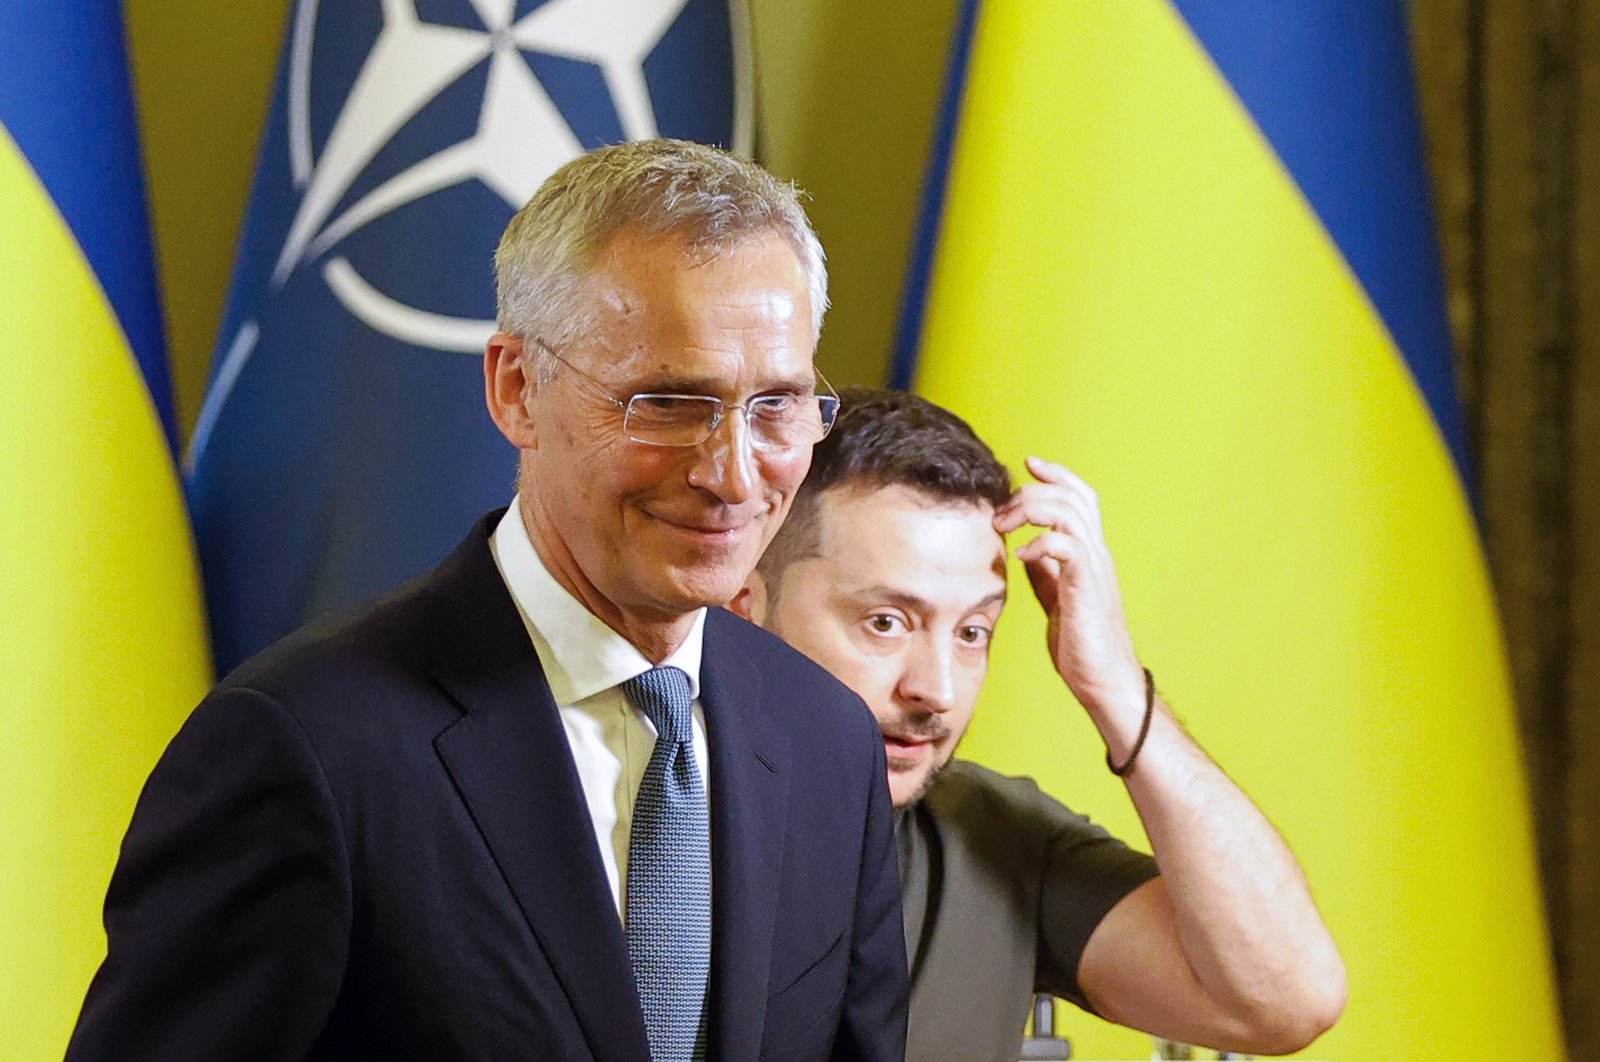 Ukrainian President Volodymyr Zelenskyy (R) and NATO Secretary General Jens Stoltenberg attend a joint press conference following their meeting in Kyiv, Ukraine, Sept. 28, 2023. (EPA Photo)